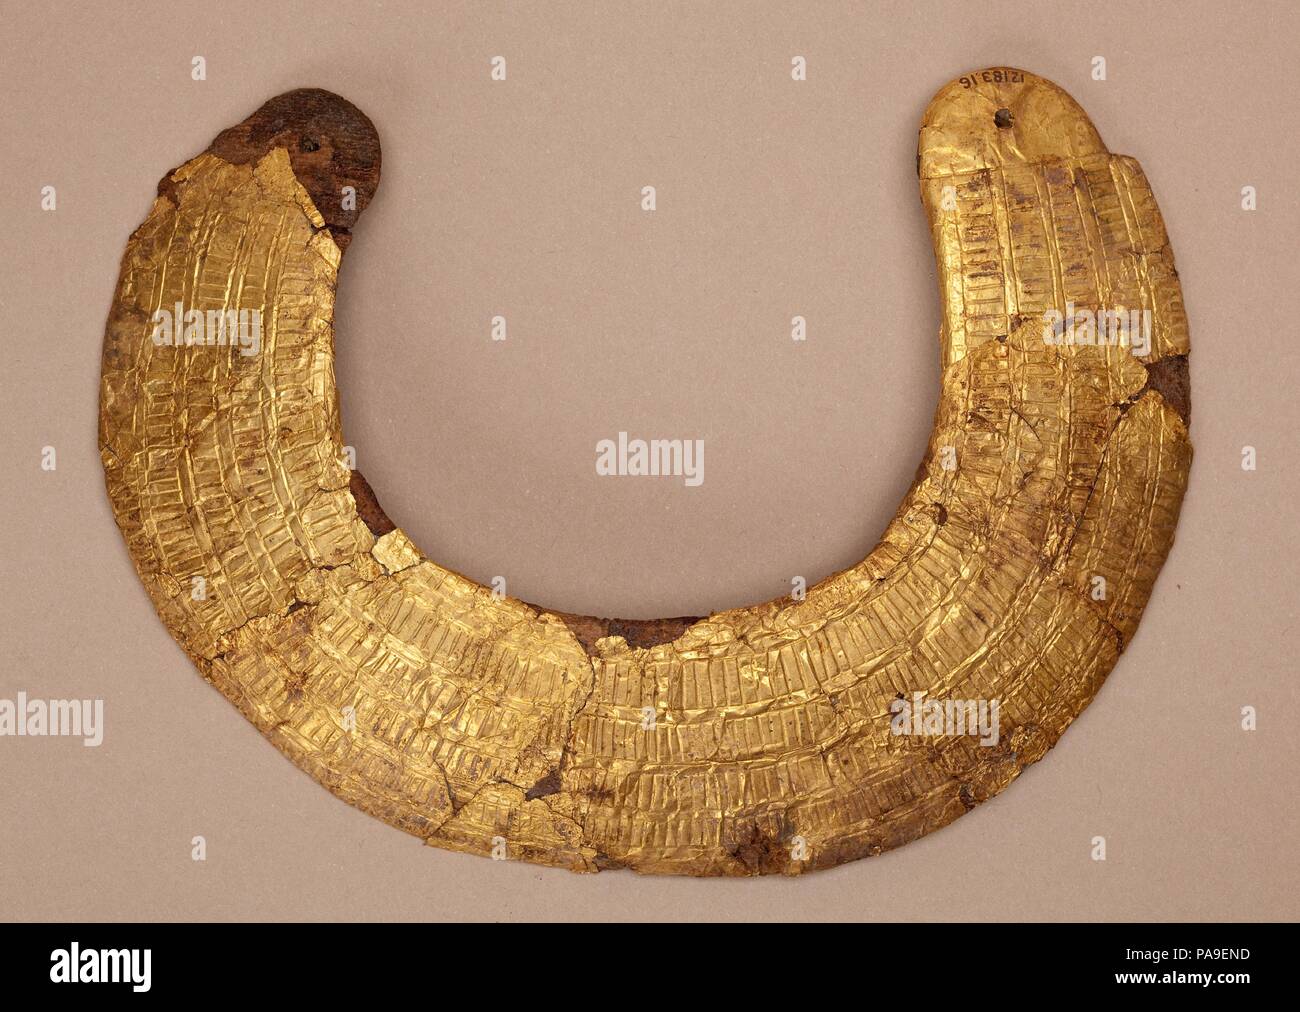 Model collar of Hapiankhtifi. Dimensions: W. 17 × Th. 1.5 cm (6 11/16 × 9/16 in.). Dynasty: Dynasty 12. Date: ca. 1981-1802 B.C..  Elaborate broad collars were worn by the Egyptian elite for a variety of festival and religious occasions. These could be floral, made from actual plant material, or crafted from individual elements of faience, metal, or semi-precious stone. This model collar of wood, gilded and engraved with representations of small beads in rows, echoing an actual example, was found on the chest of Hapiankhtifi's mummy. A string would have been passed through the holes in the two Stock Photo